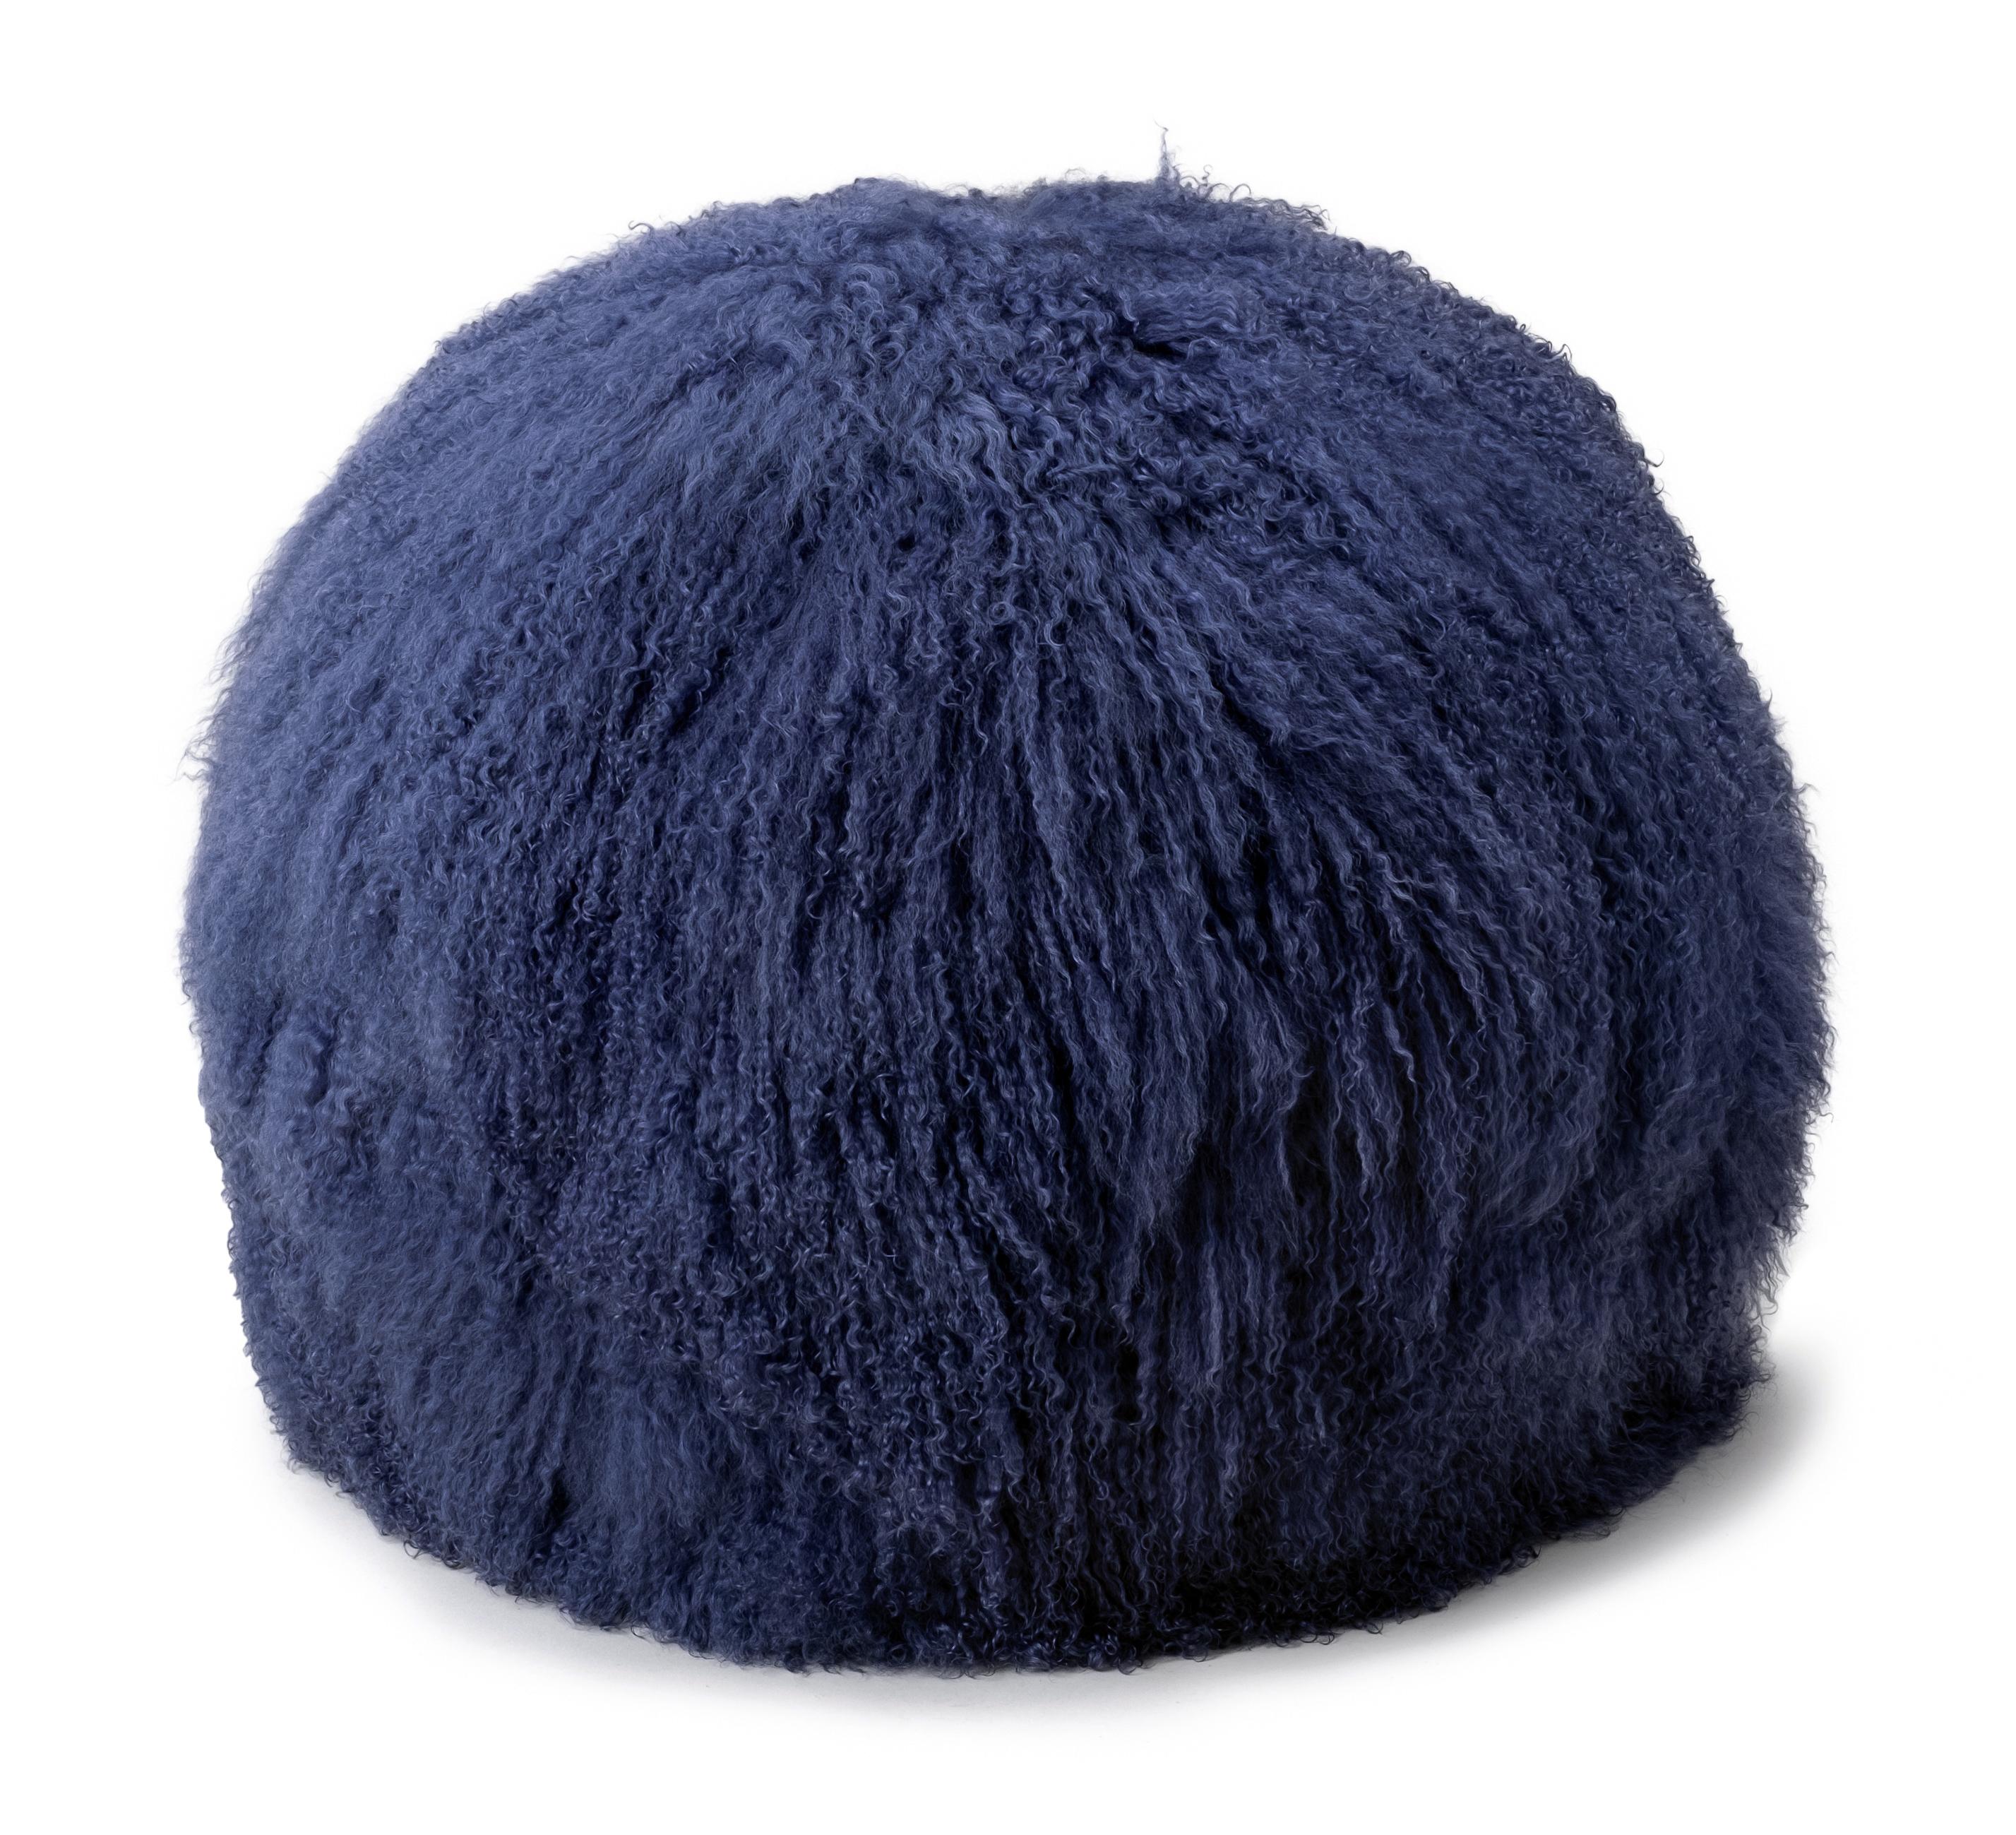 Featured in Tibetan Lamb Shearling, the Hudson Ottoman exudes luxury. These structured and supportive round ball ottomans are designed to function as a traditional leg rest, add a twist to secondary living room seating, or as playful and sculptural